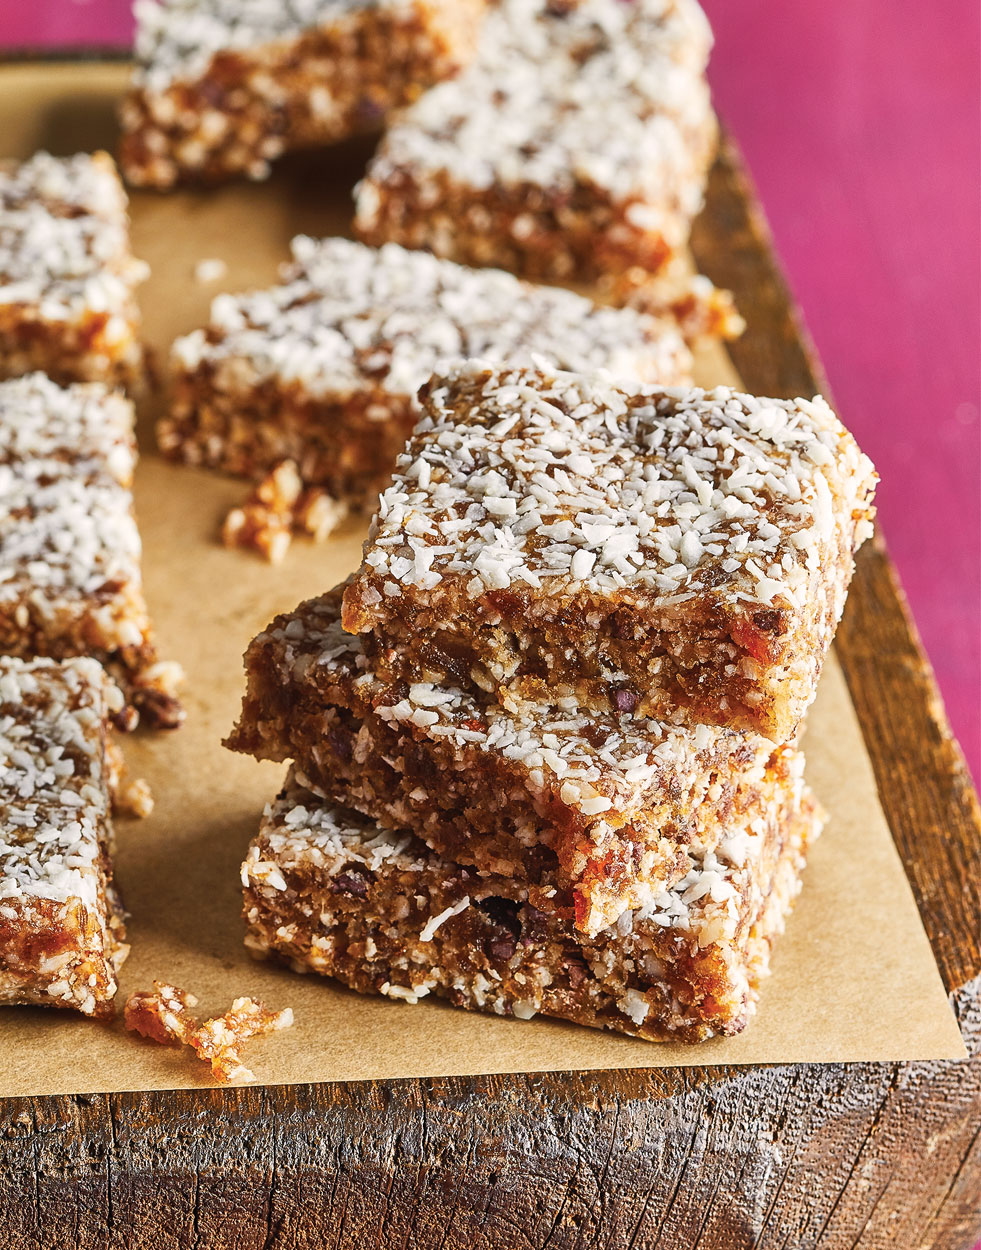 Coconut-Date Bars with macadamia nuts